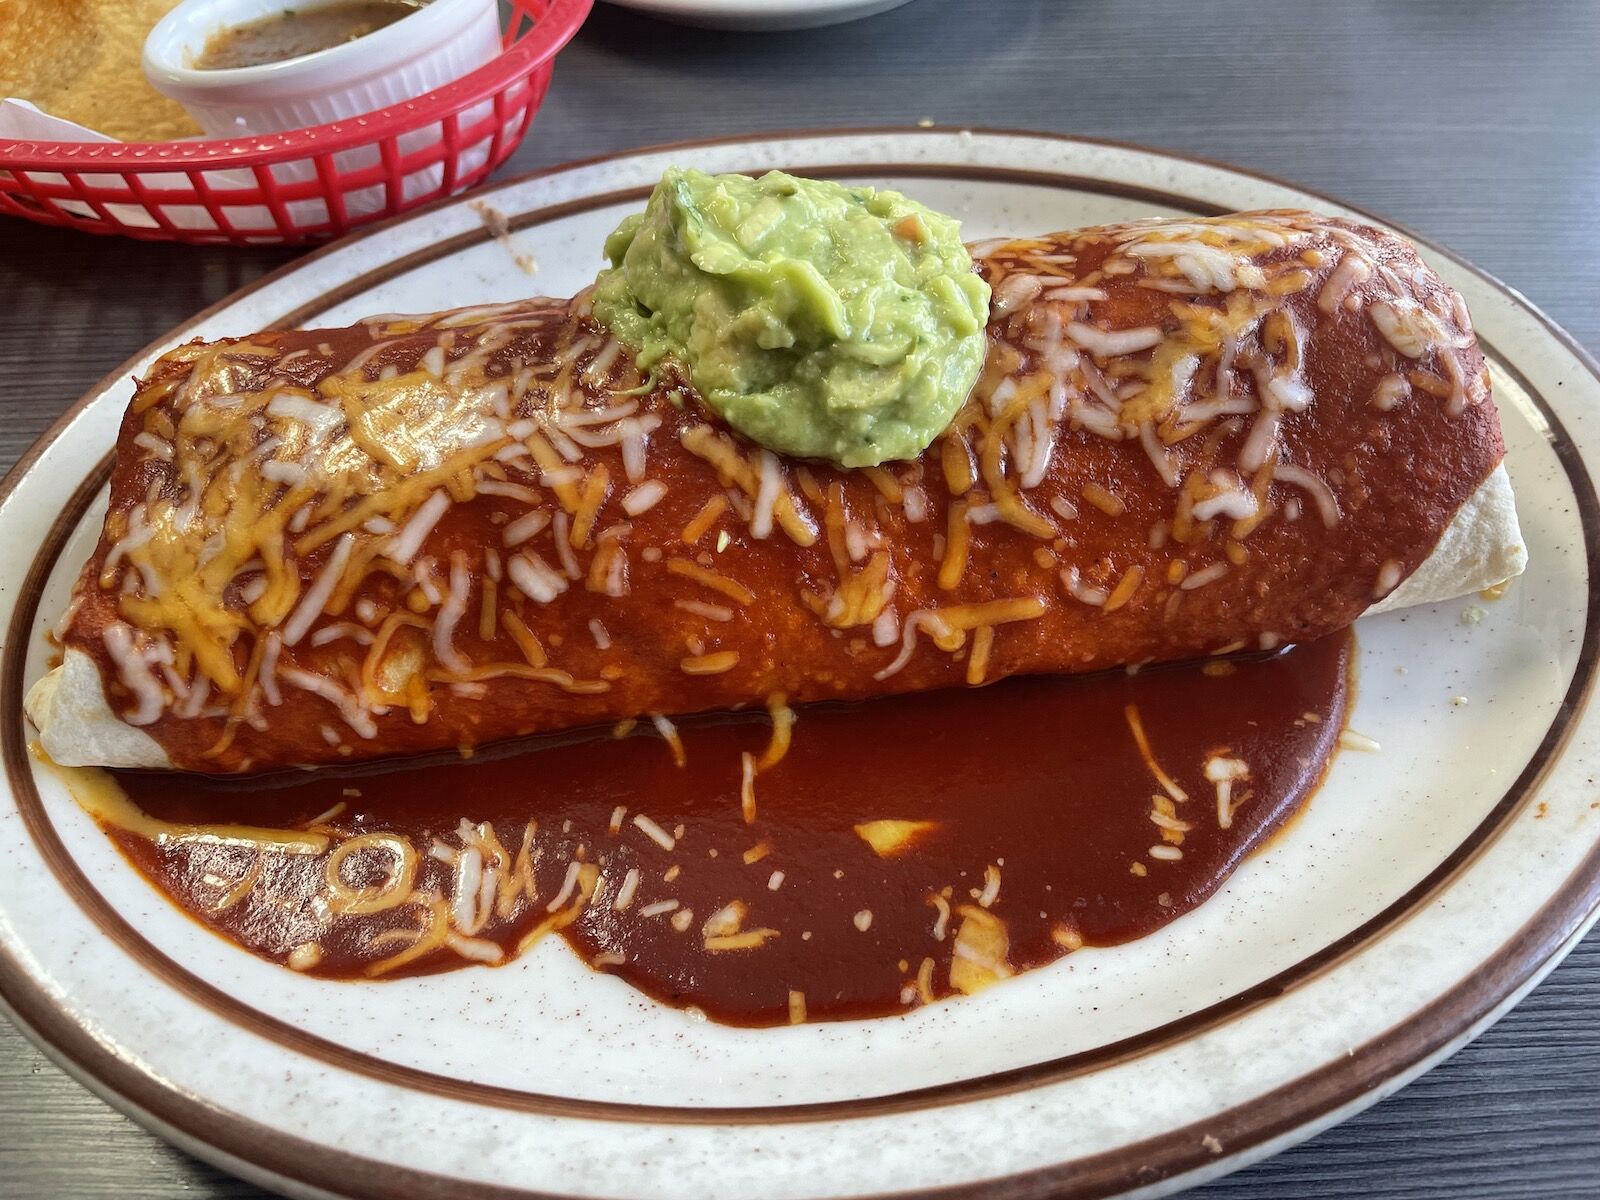 A large burrito topped with red sauce shredded cheese and guacamole on a white plate from La Cabanita